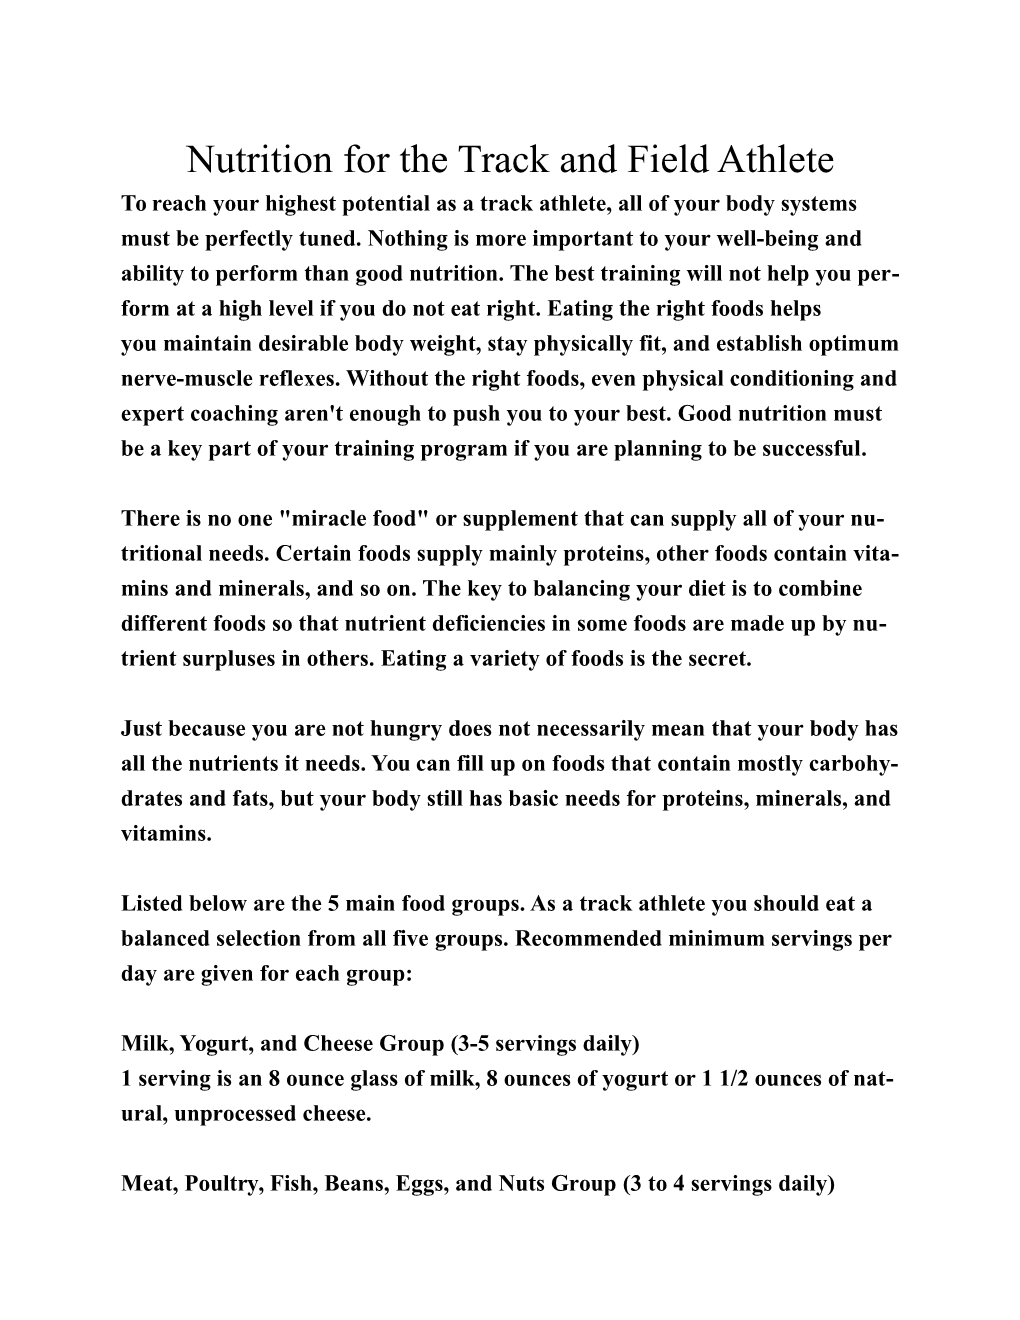 Nutrition for the Track and Field Athlete